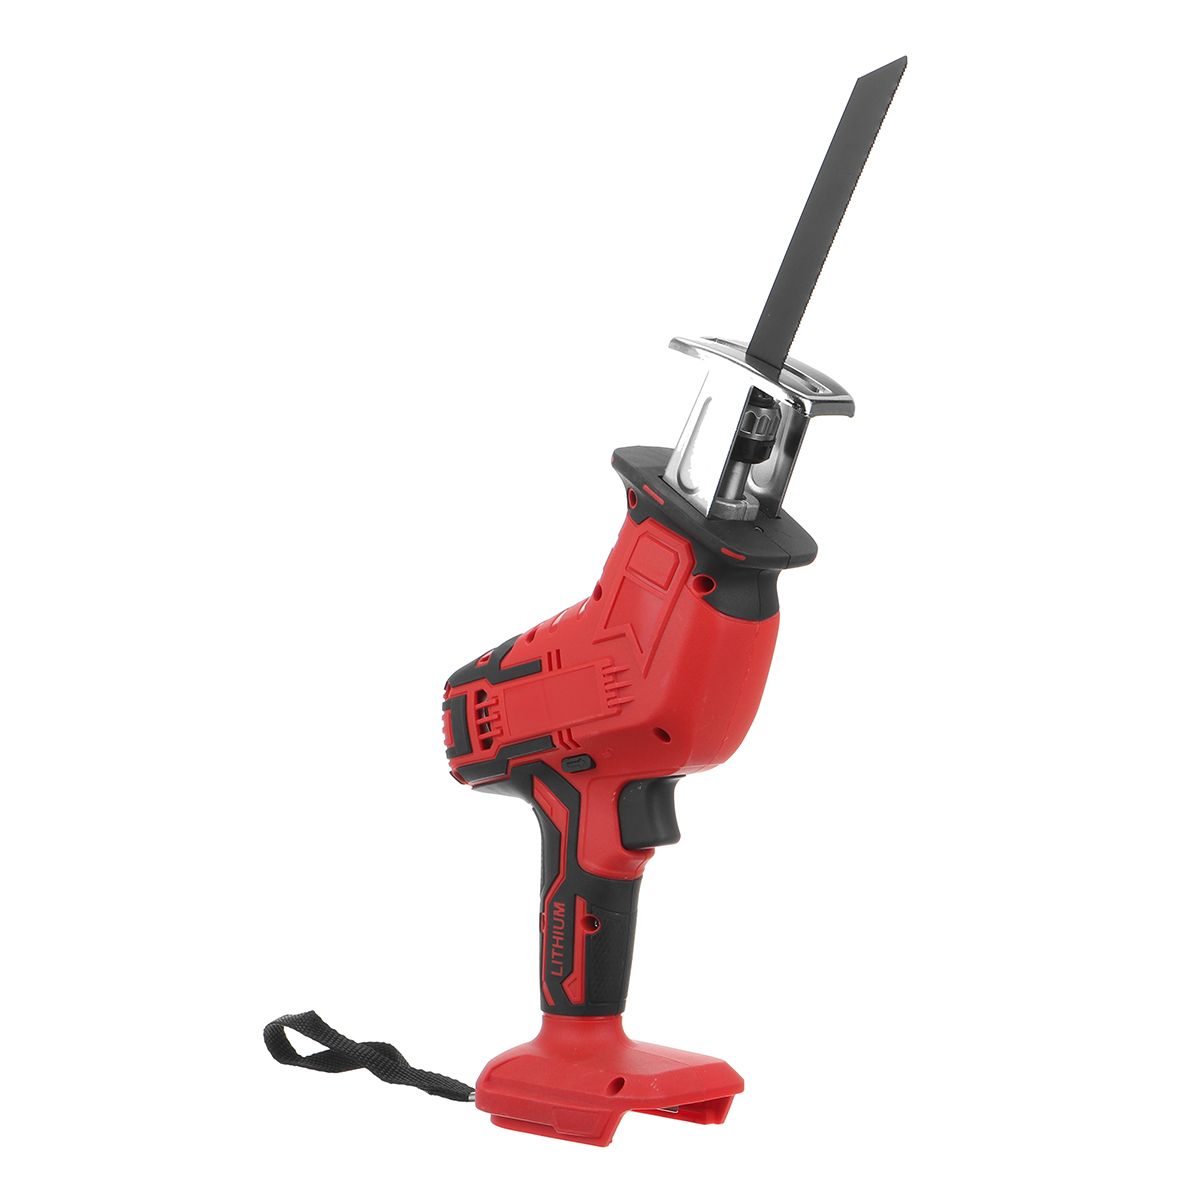 18V-Coedless-Handheld-Electric-Reciprocating-Saw-Electric-Saber-Saw-With-4X-Saw-Blades-Adapted-To-Ma-1662223